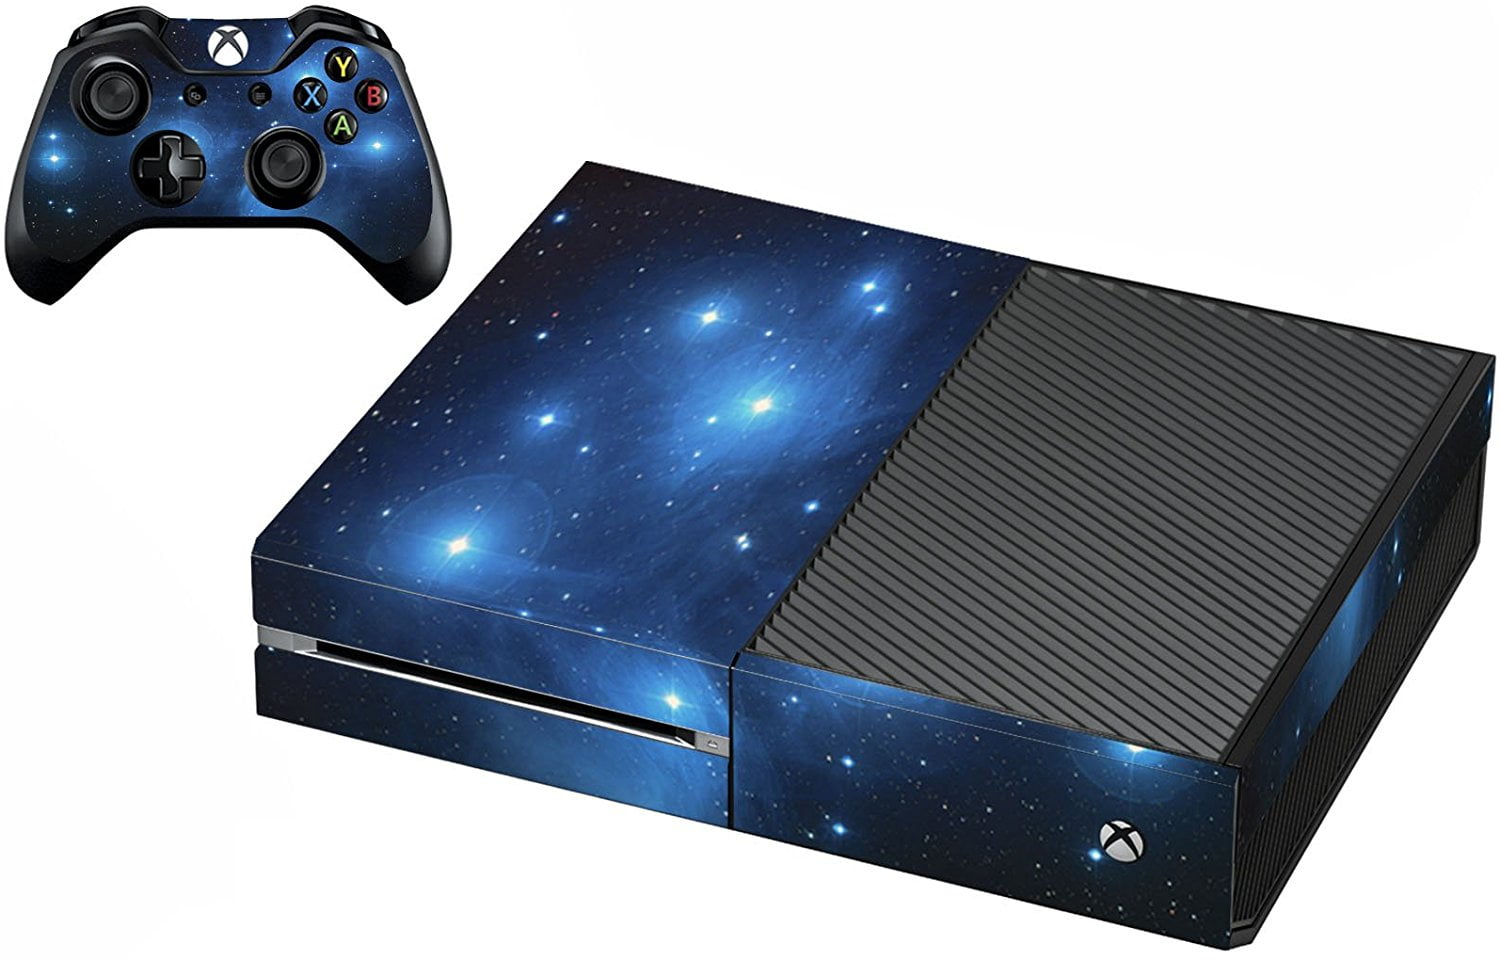 Vwaq Xbox One Galaxy Skins For Console And Controller Space Skin